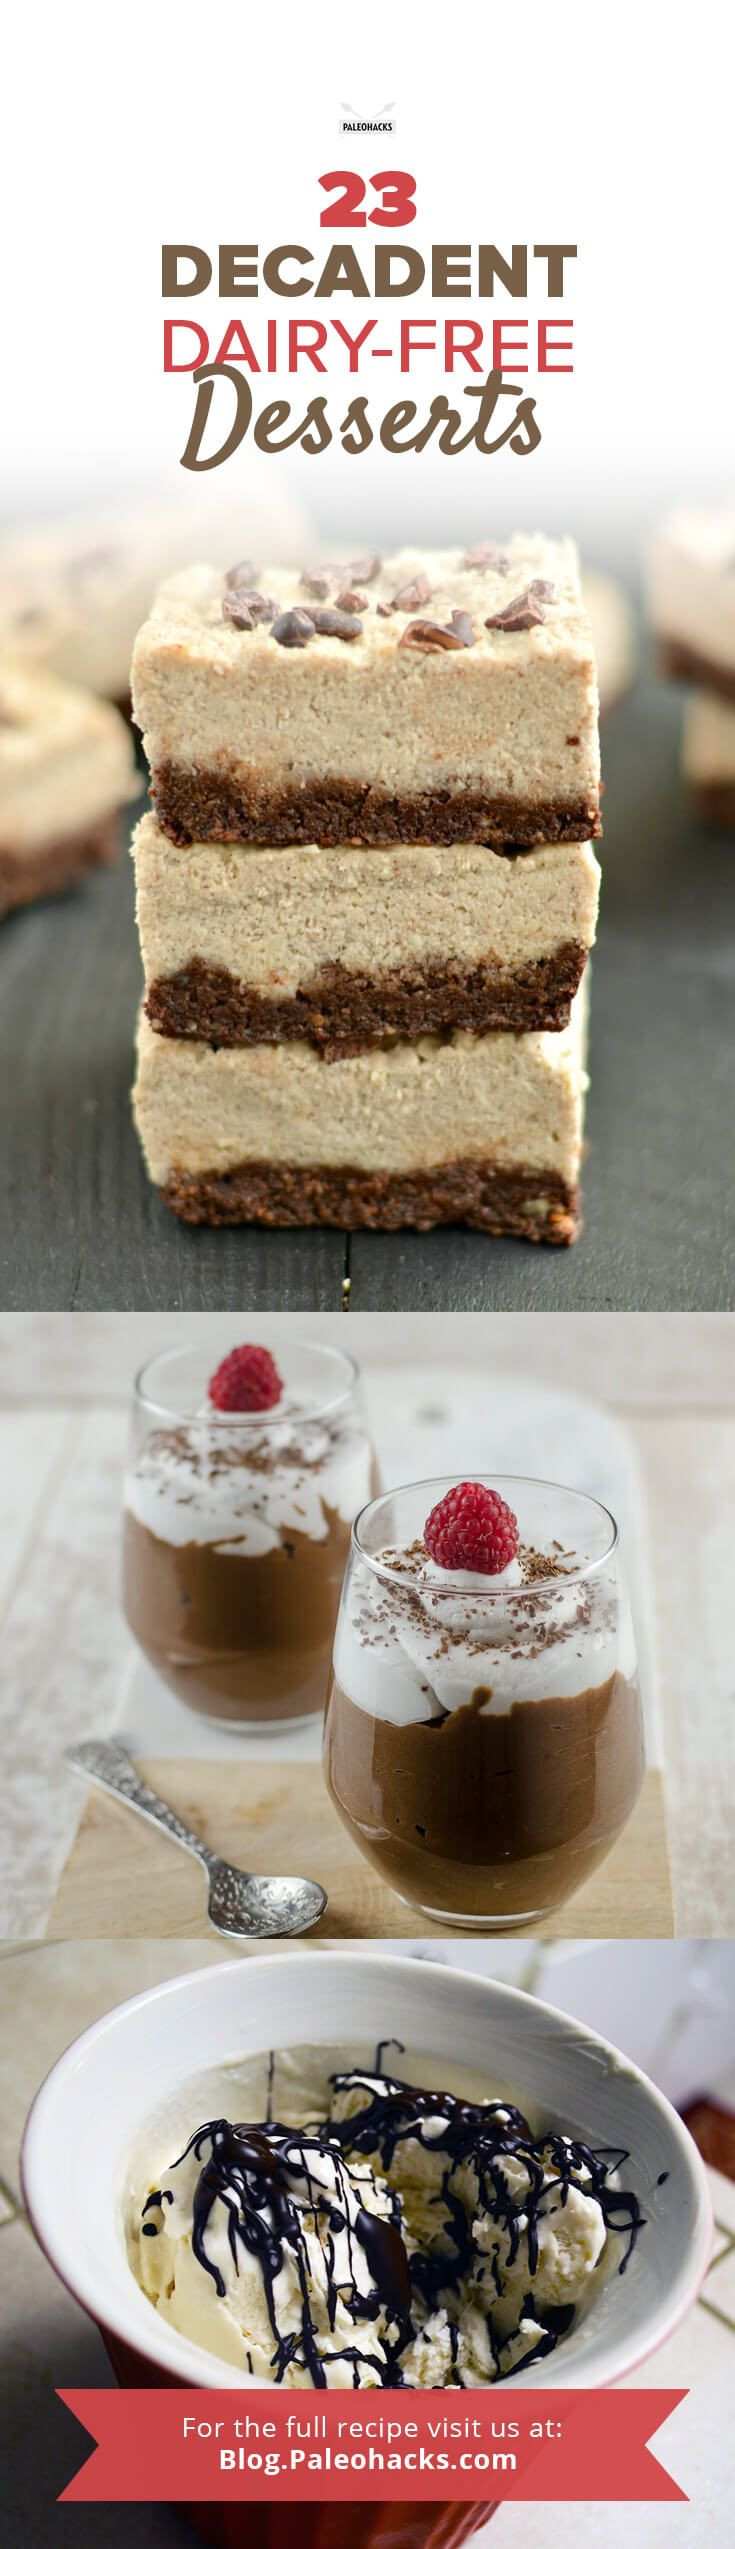 Best Dairy Free Desserts
 17 Best images about Foods on Pinterest